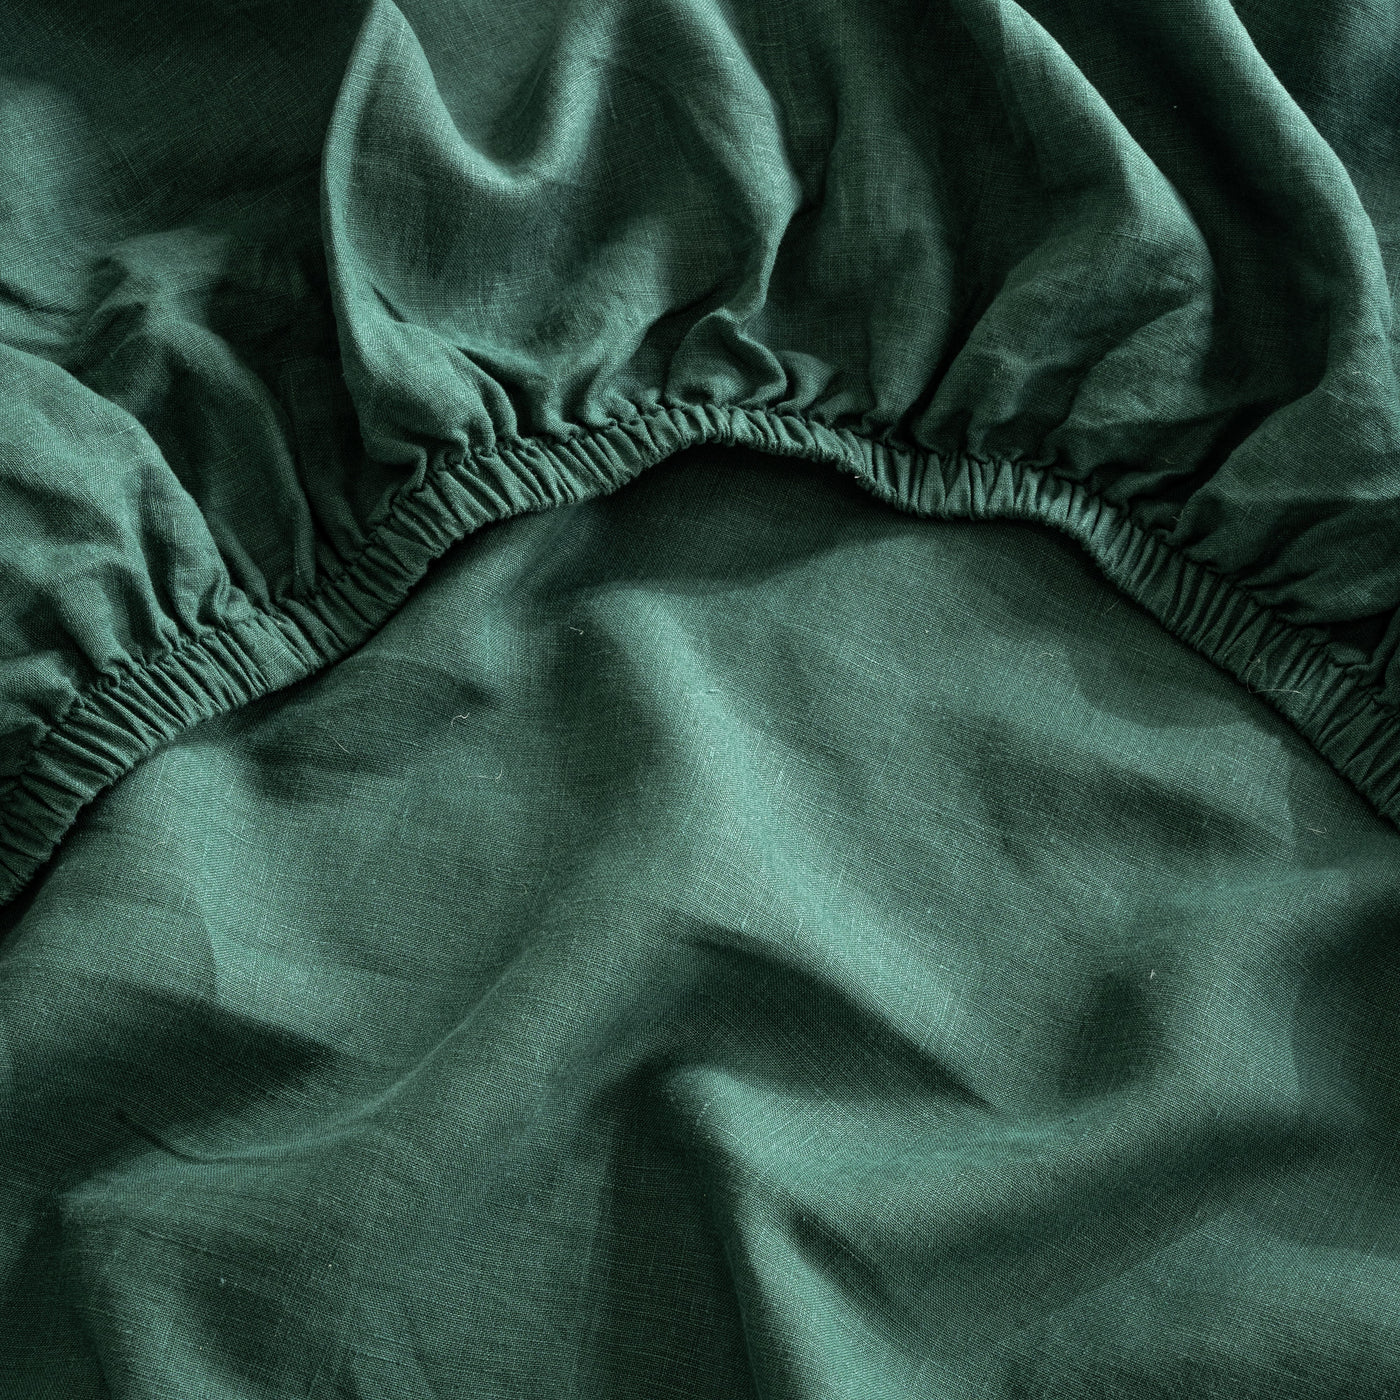 French Flax Linen Sheet Set in Jade